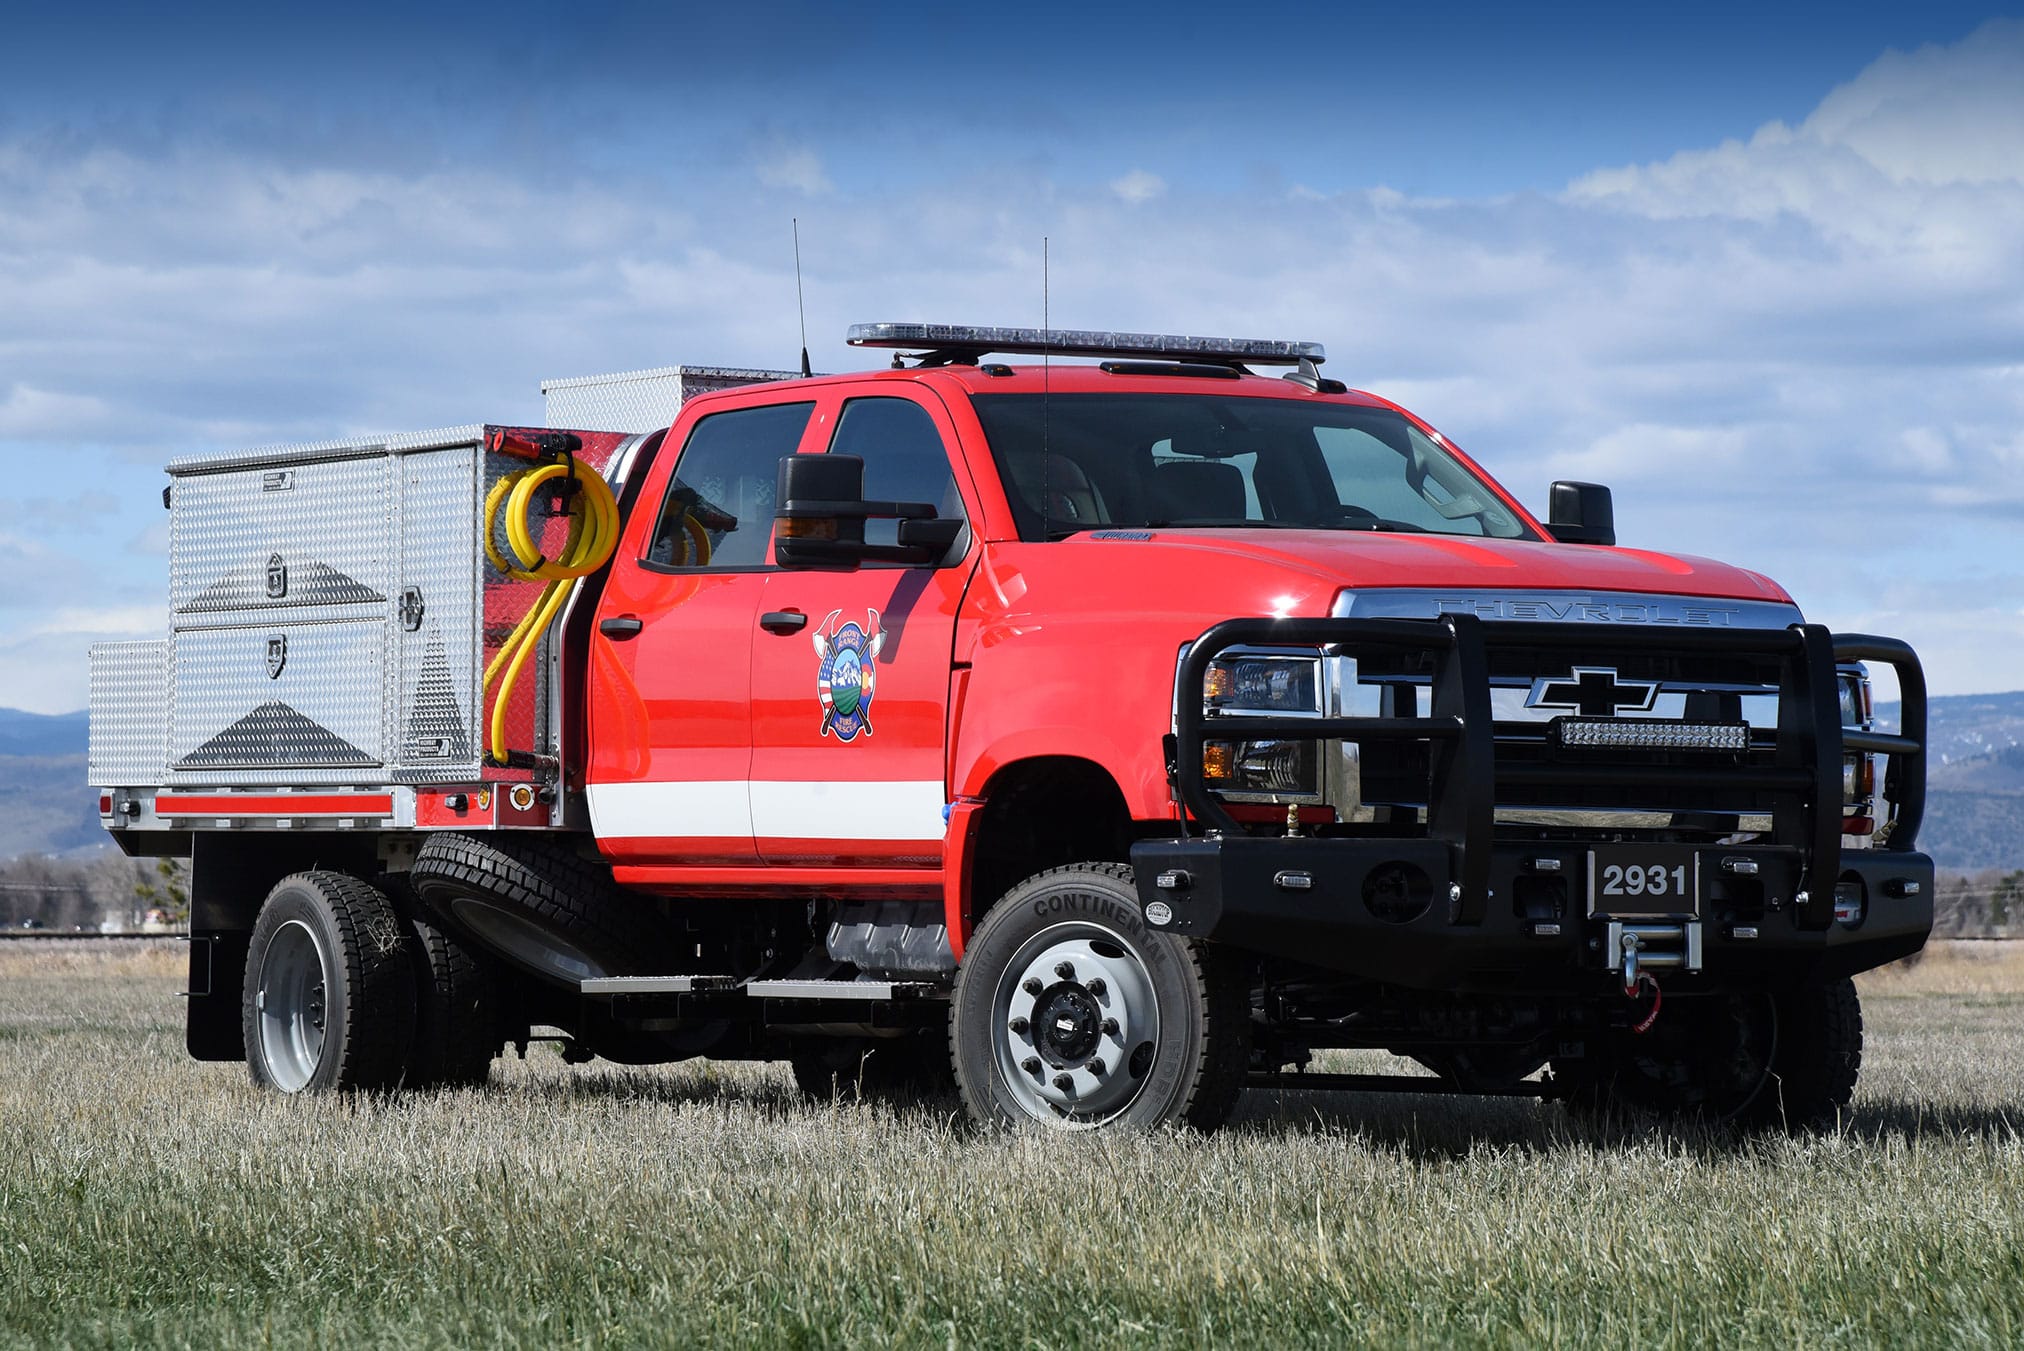 Featured image for “Front Range Fire Rescue, CO Type 6 Brush Truck #1083”